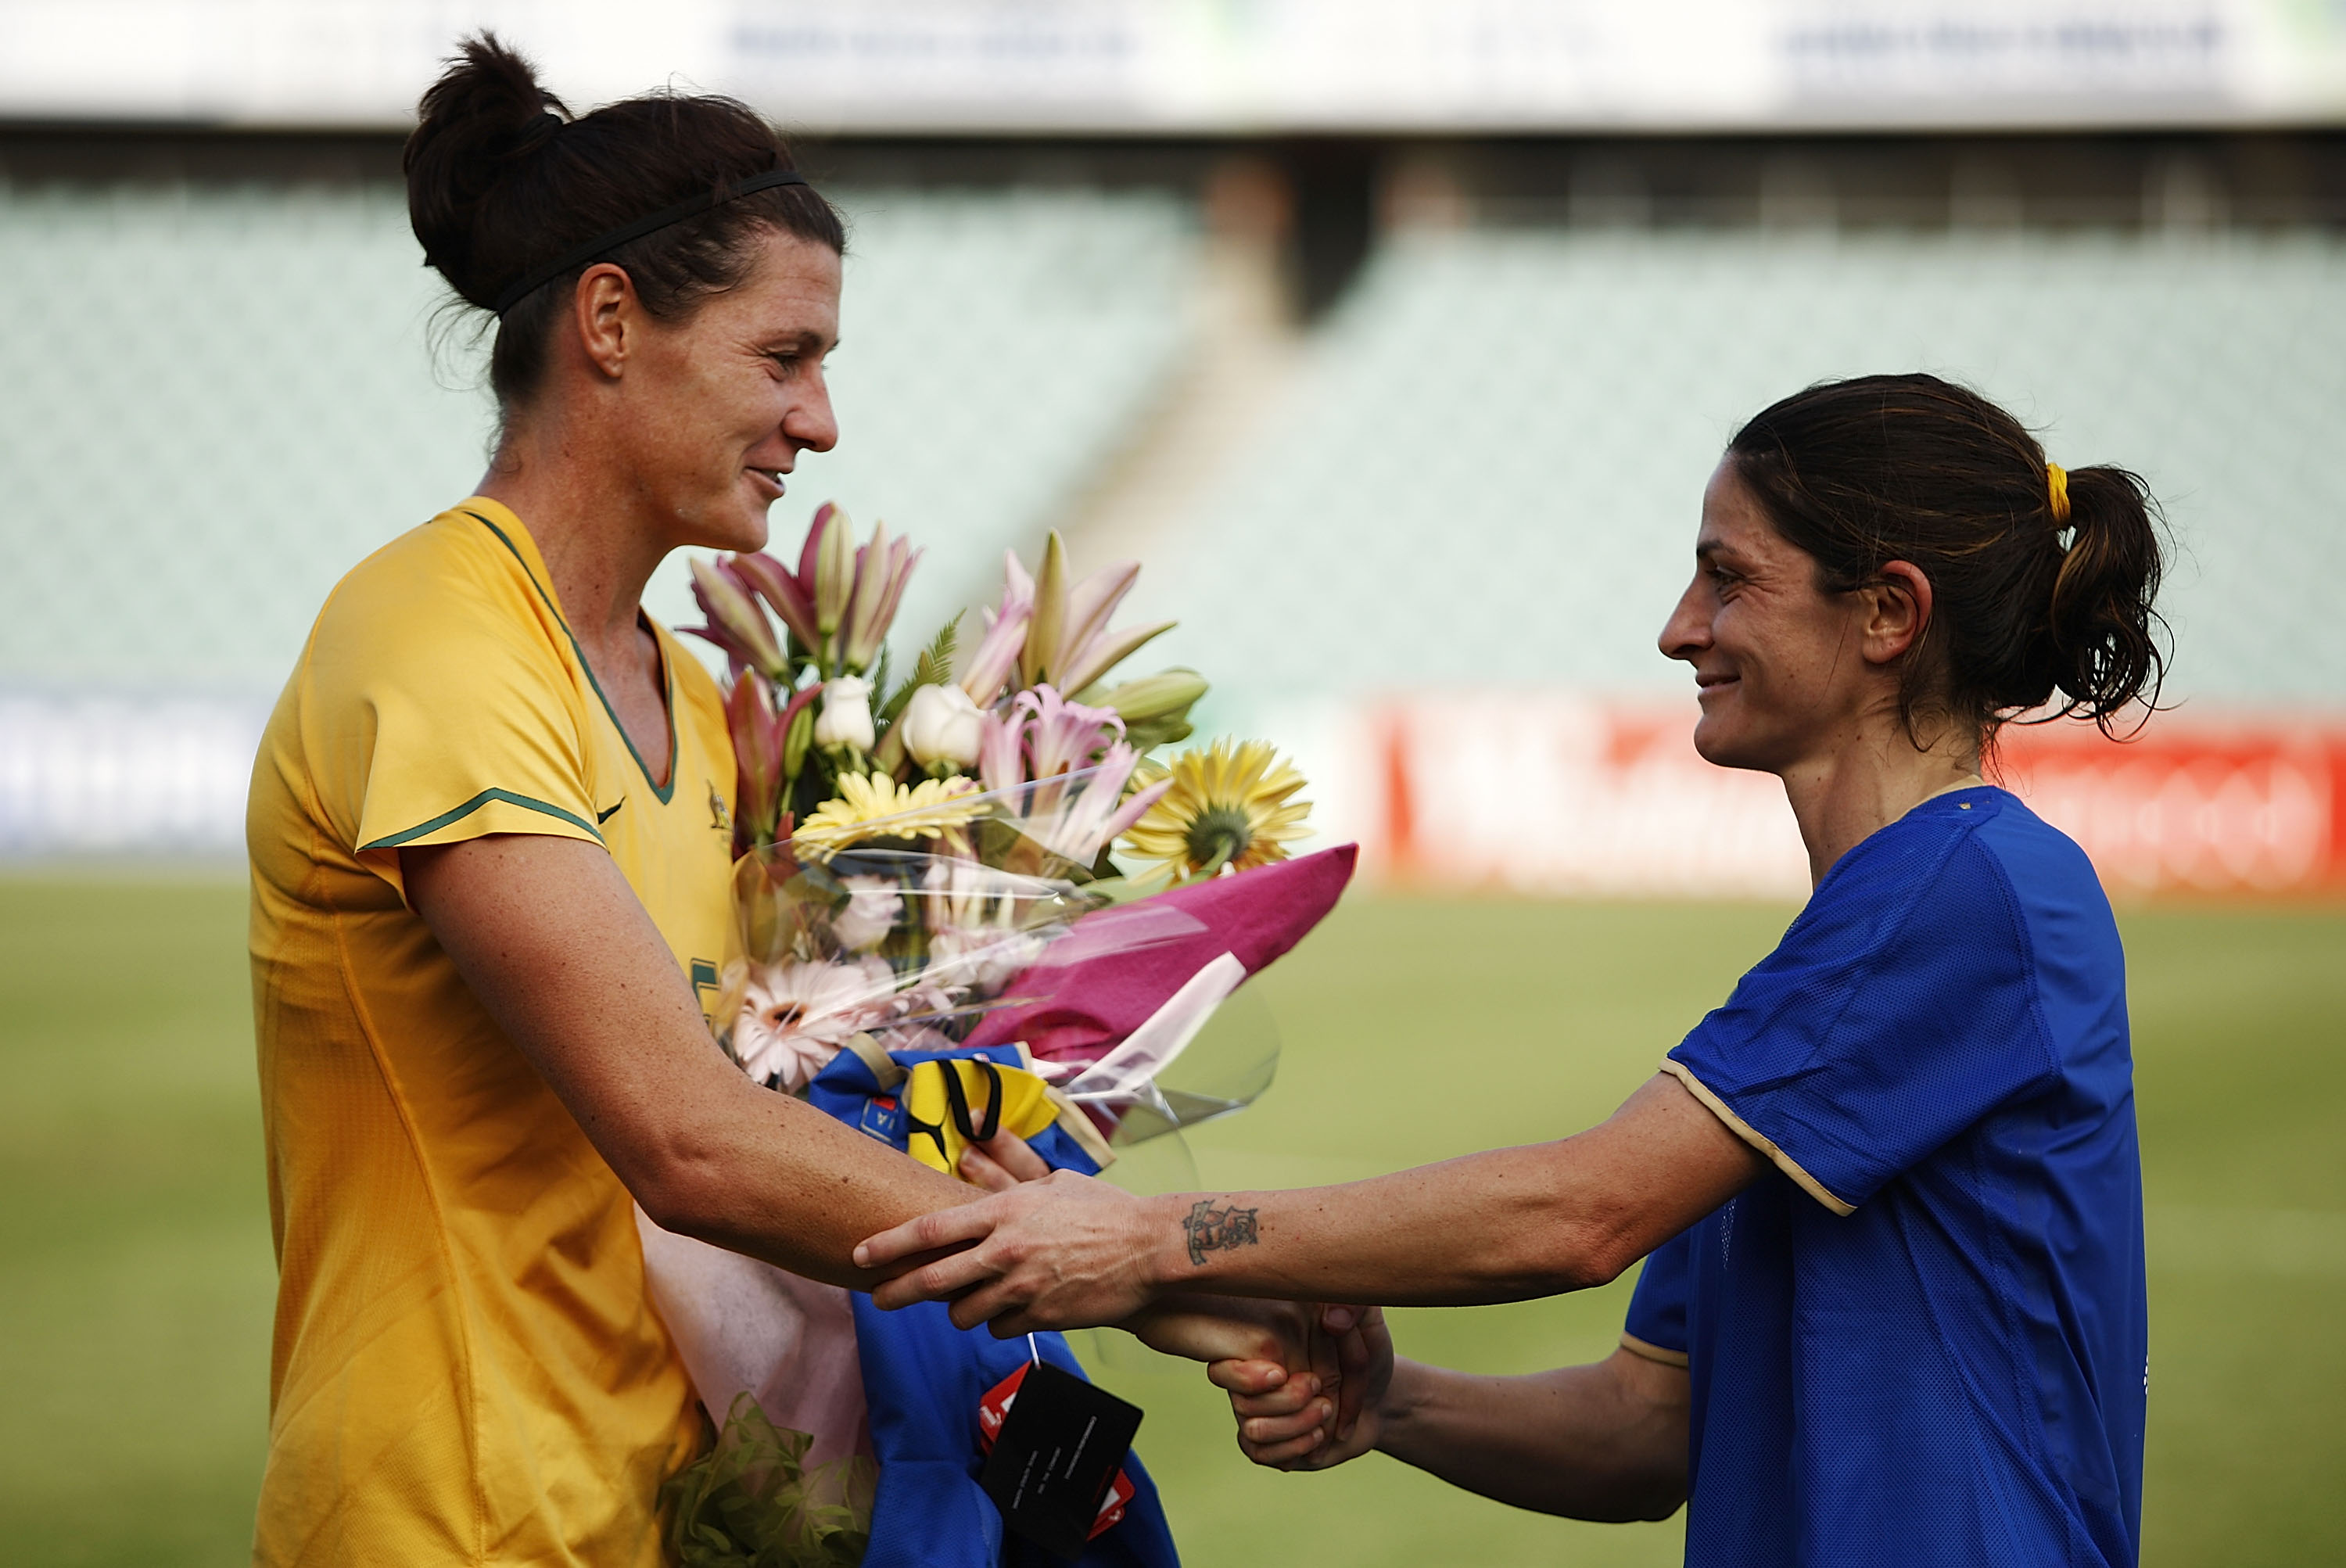 Cheryl Salisbury of Australia is presented with an Italian jersey from Patrizia Panico of Italy during the women's international friendly match between the Australian Matildas and Italy held at Parramatta Stadium January 31, 2009 in Sydney, Australia. (Photo by Brendon Thorne/Getty Images)